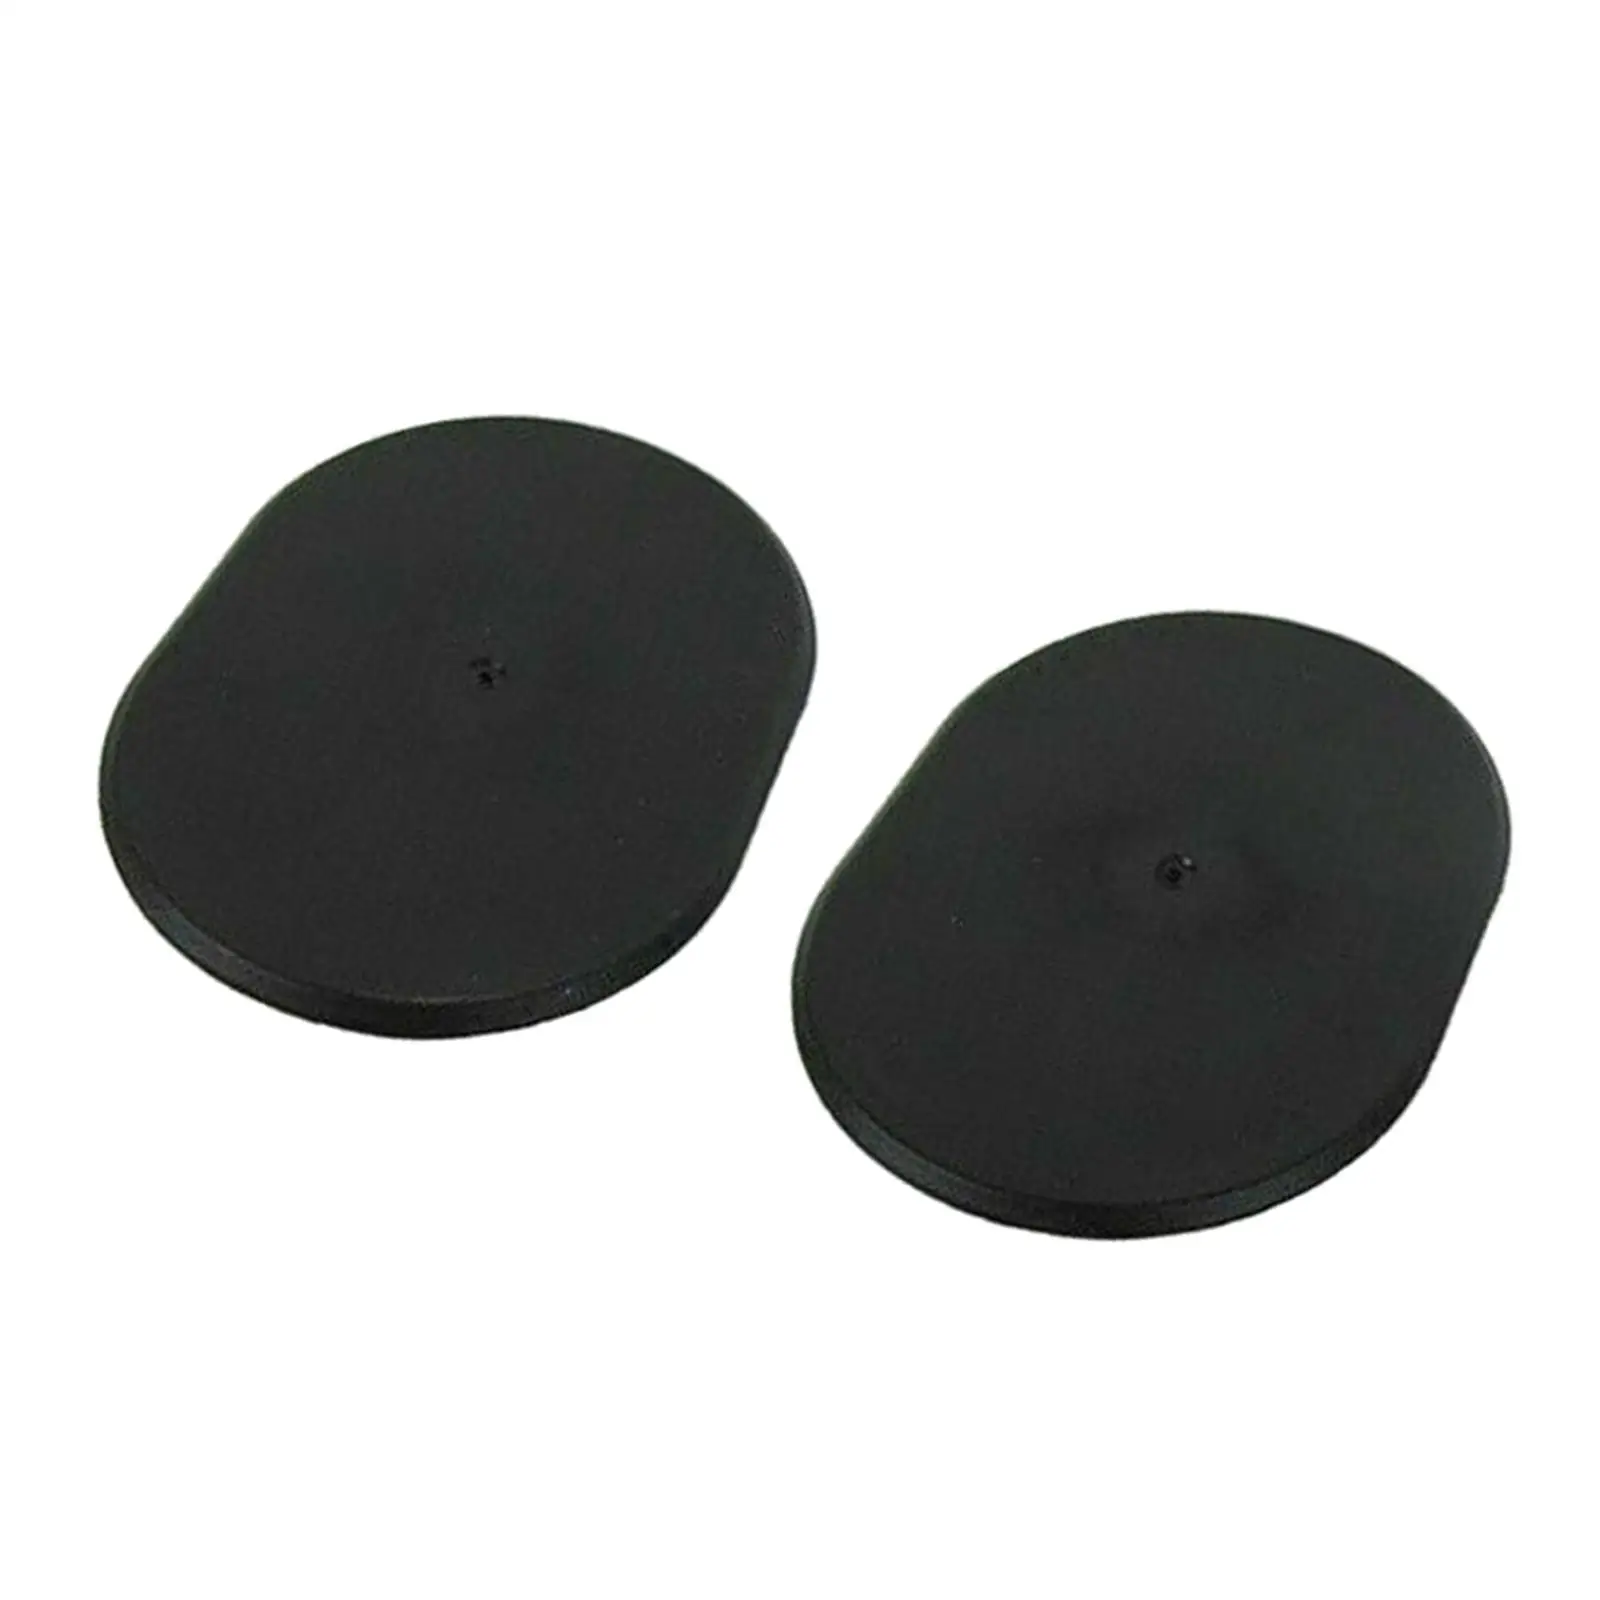 

2 Pieces Truck Bed Plugs 55359234AC Truck Bed Body Plugs Fit for RAM 1500 2500 3500 4500 5500 02-18 Body Plug Cover Black